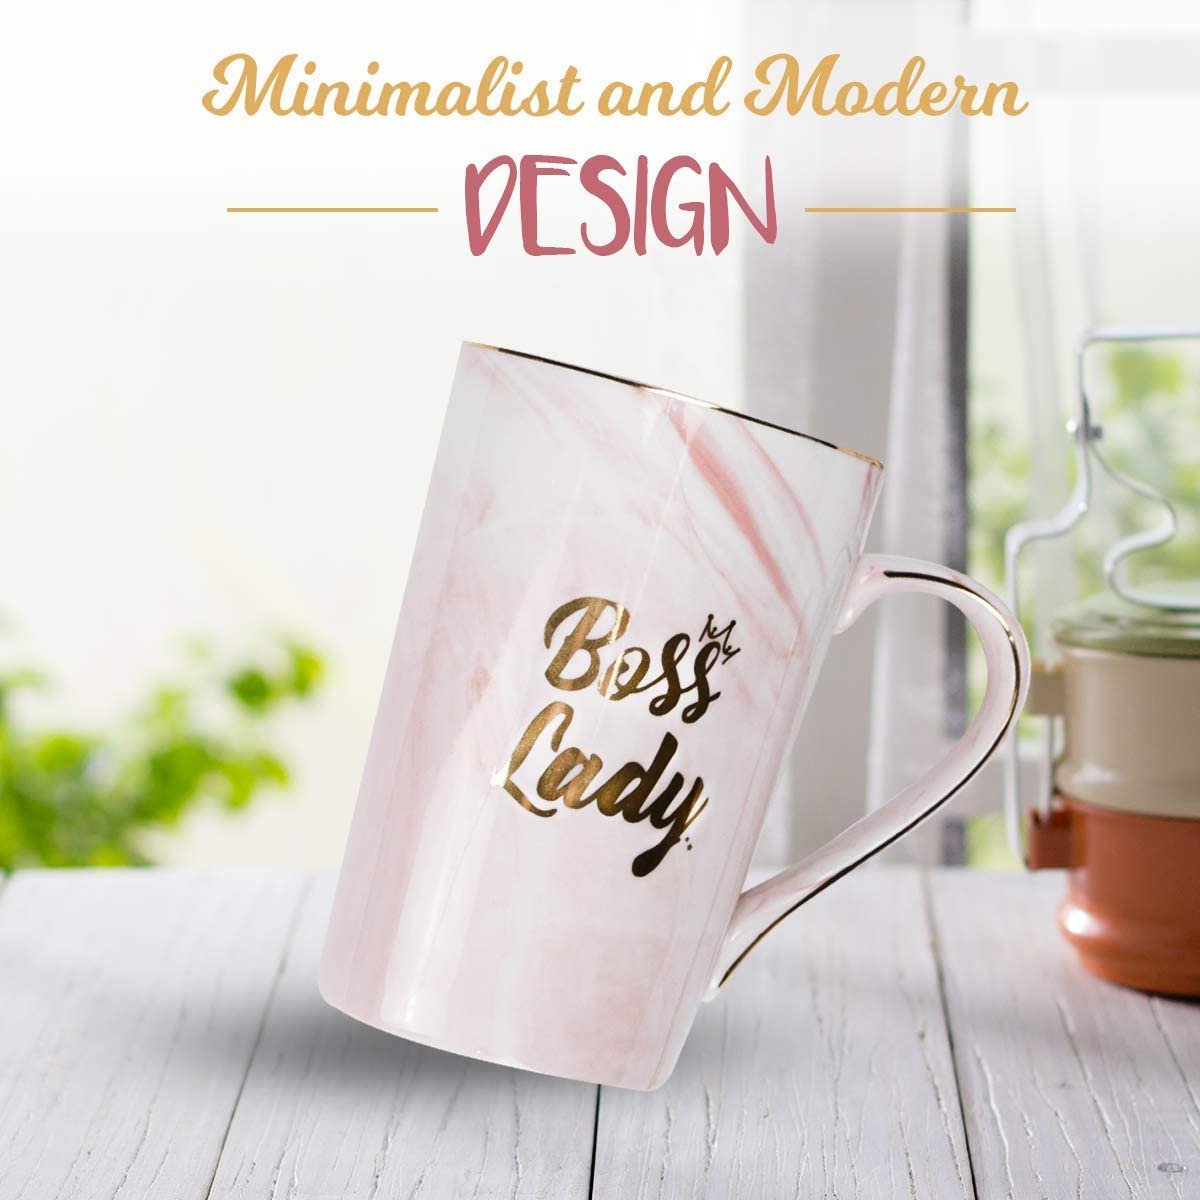 Coffee Mugs For Women, Boss Lady Gifts For Women, Birthday Gifts For Mom, Retirement Gifts For Women, Office Decor for Women Desk, Rose Gold Decor, Funny Gifts For Women, Unique Gifts For Women - image 3 of 6